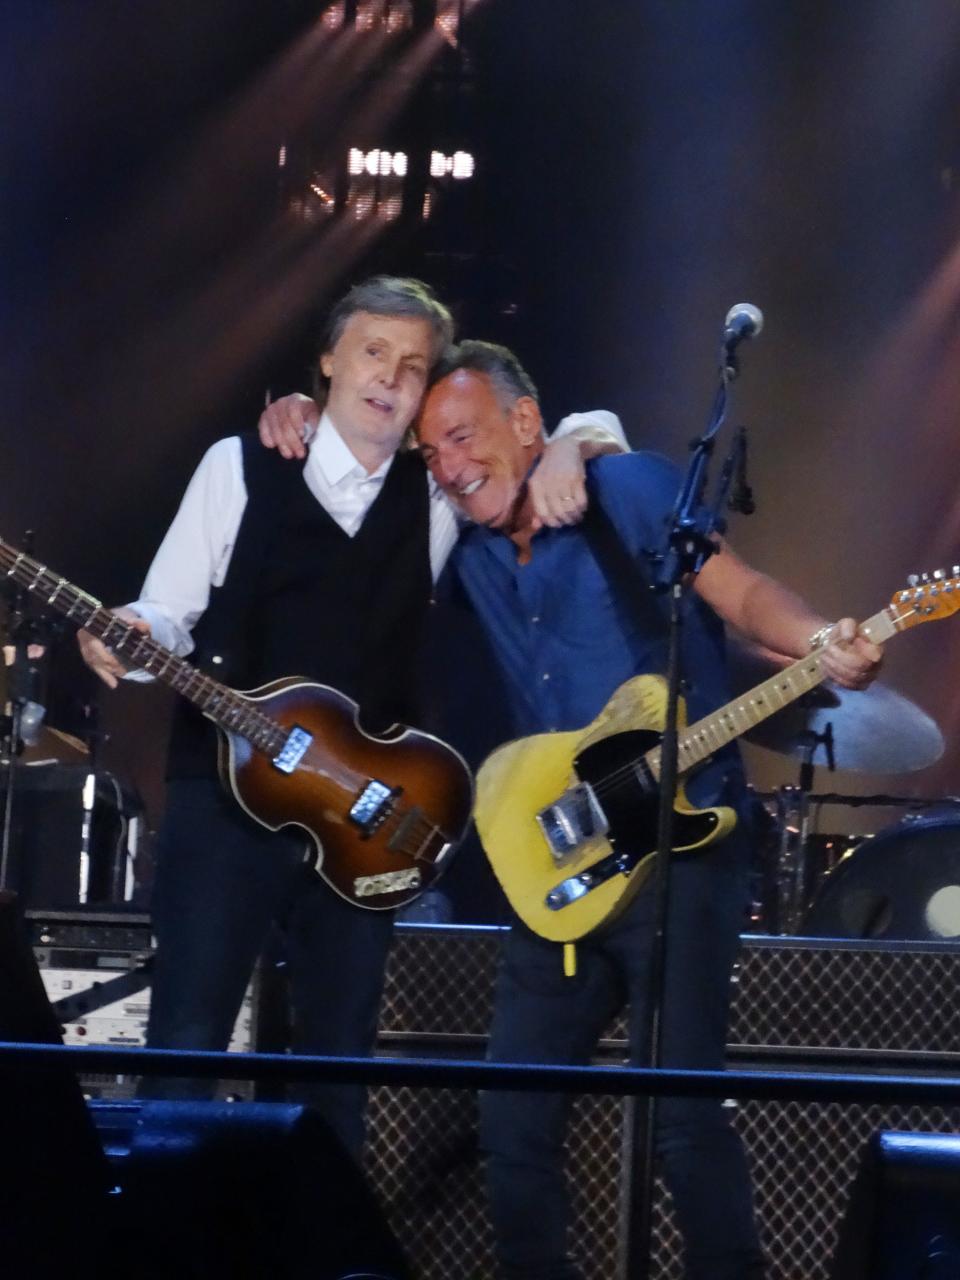 Bruce Springsteen joins Paul McCartney on stage at MetLife Stadium in East Rutherford on Thursday, June 16, 2022. Photo courtesy of Bob Gannon of Toms River.